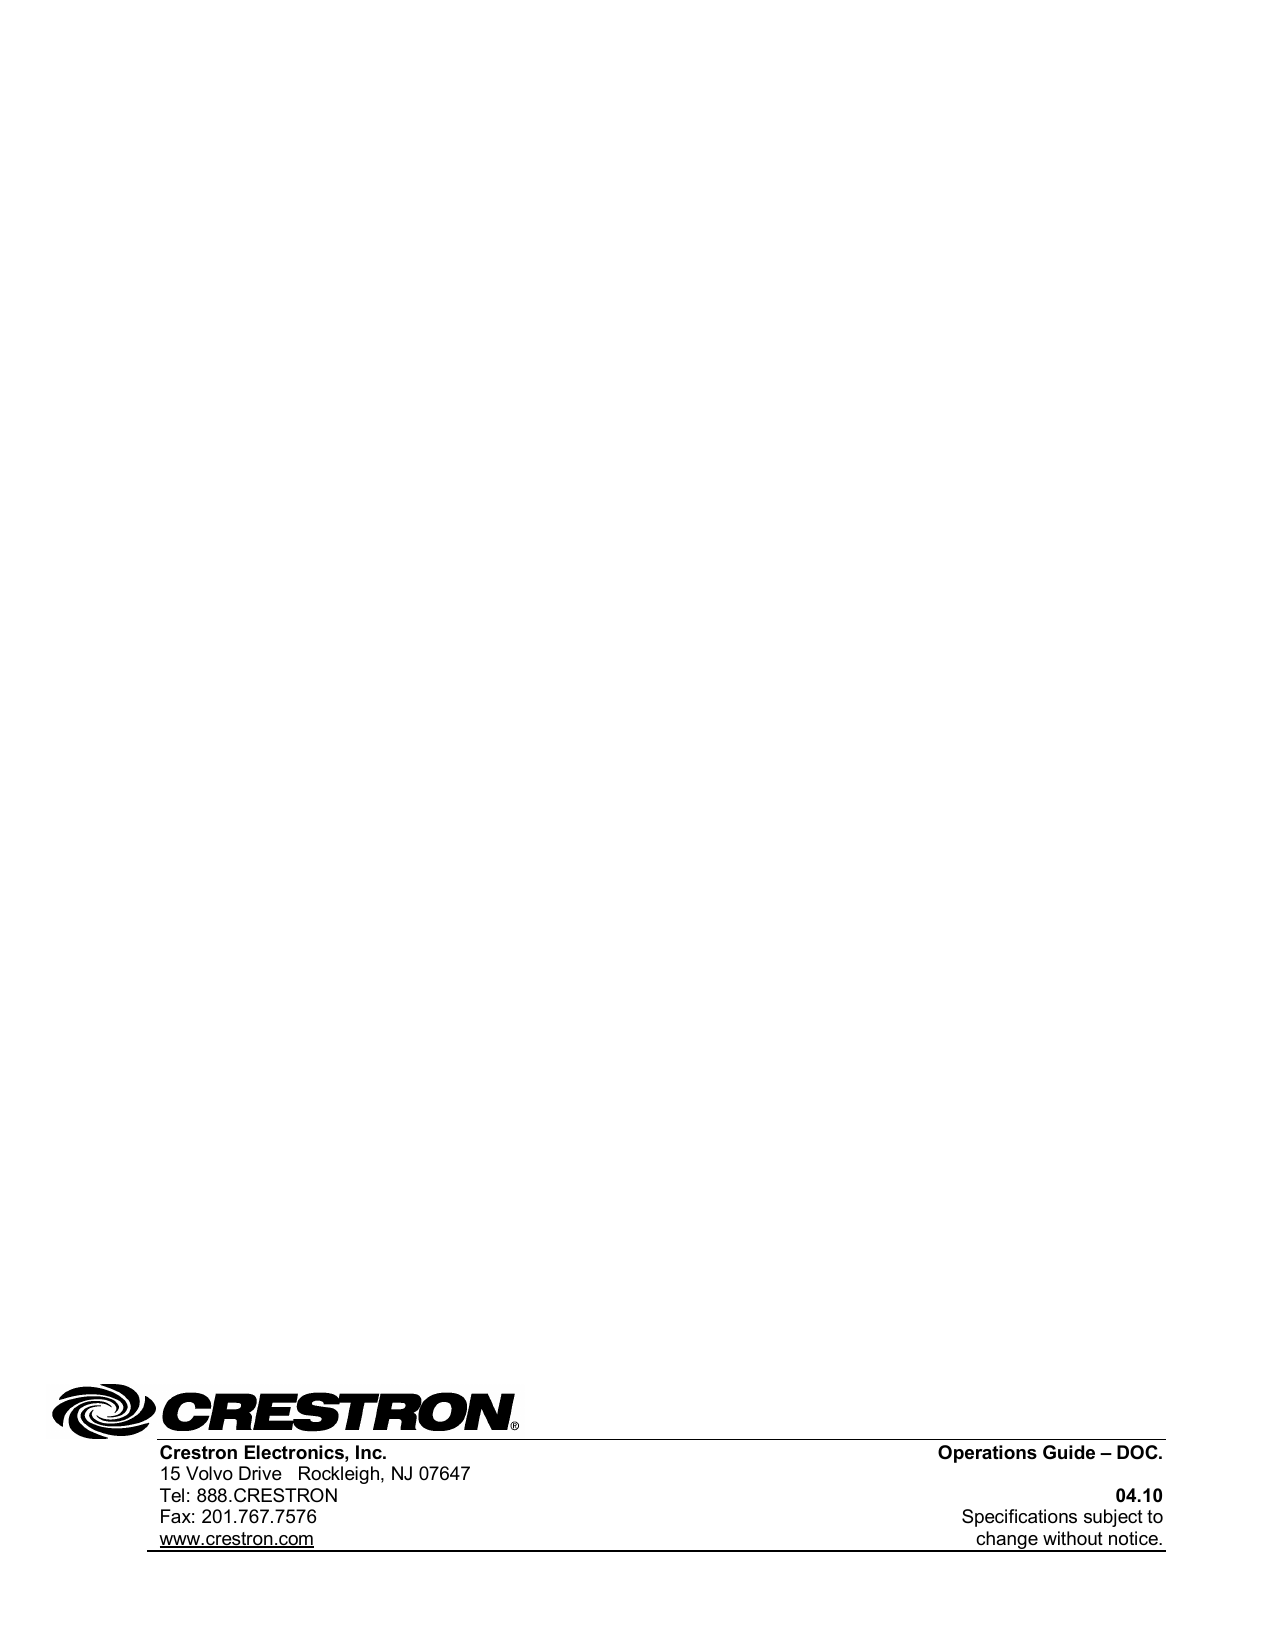  Crestron Electronics, Inc. Operations Guide – DOC.  15 Volvo Drive   Rockleigh, NJ 07647  Tel: 888.CRESTRON 04.10 Fax: 201.767.7576  Specifications subject to www.crestron.com change without notice.                                                      